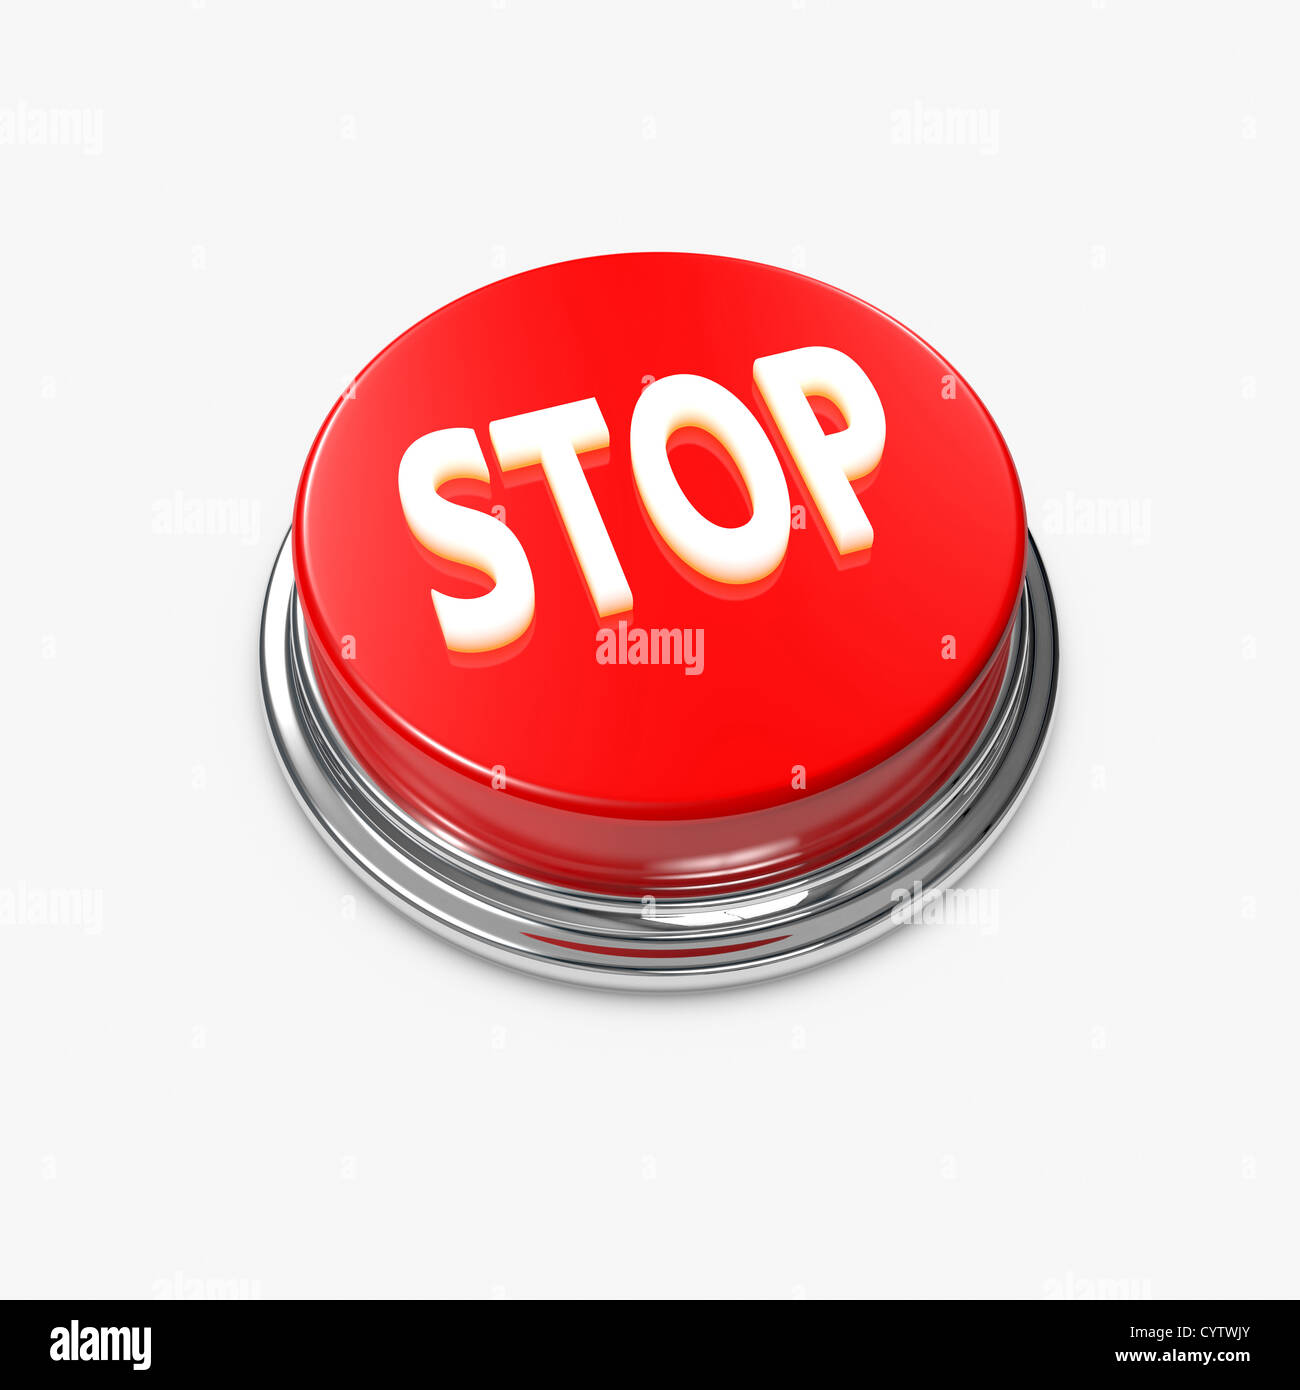 A Red Alert Button with the caption Stop. Stock Photo